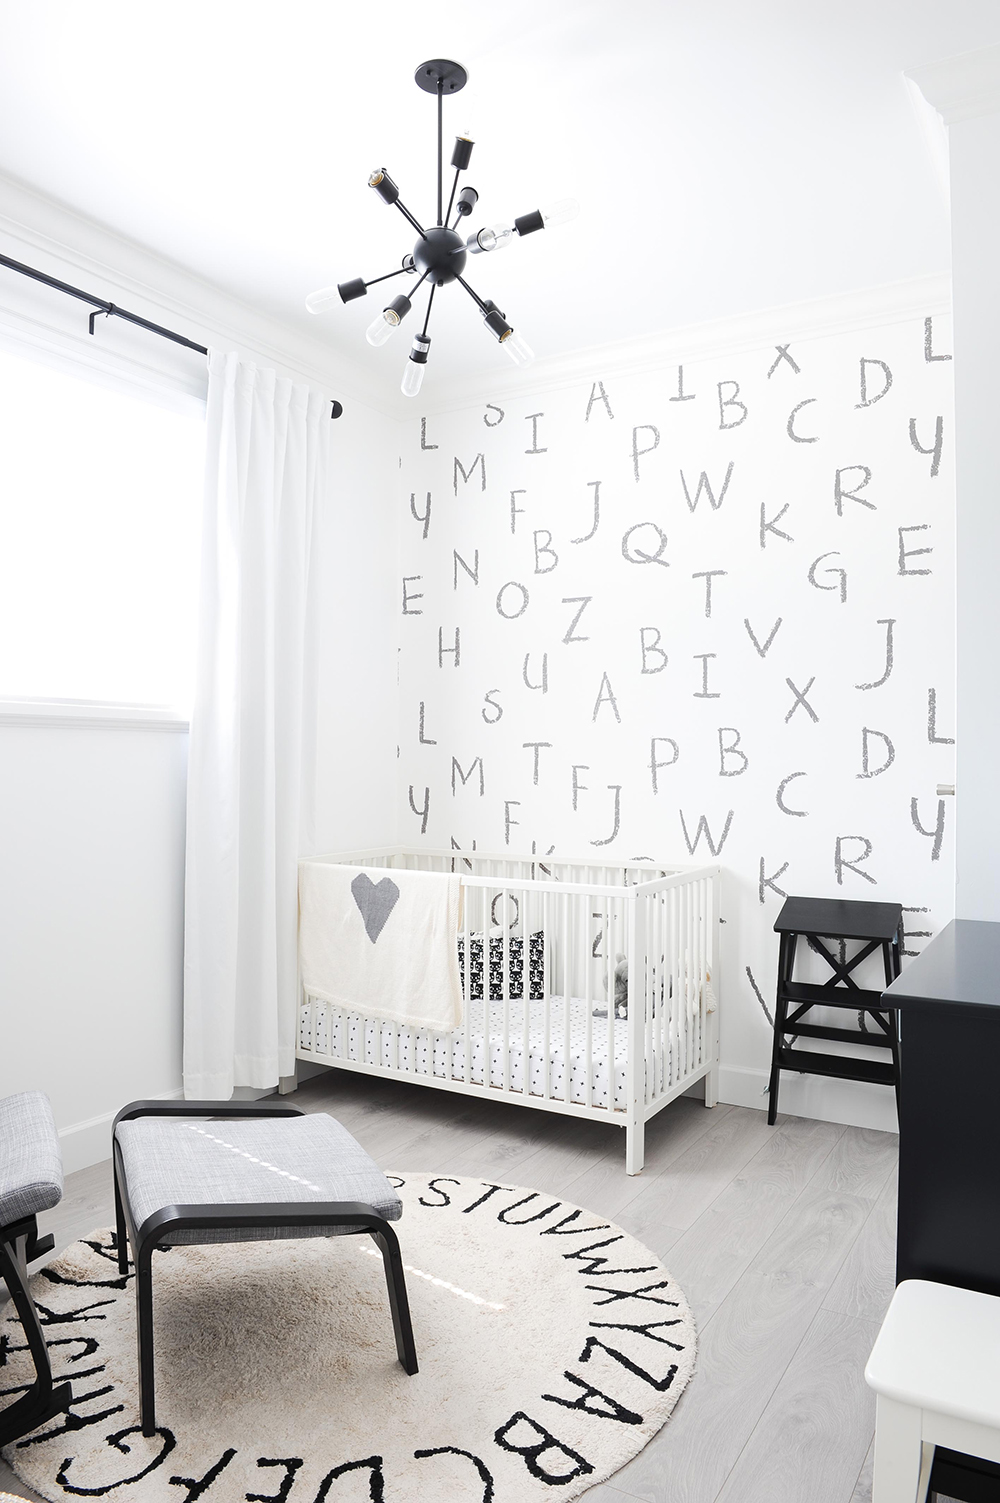 This ABC wallpaper is from Anewall and is cutely referenced in the area rug